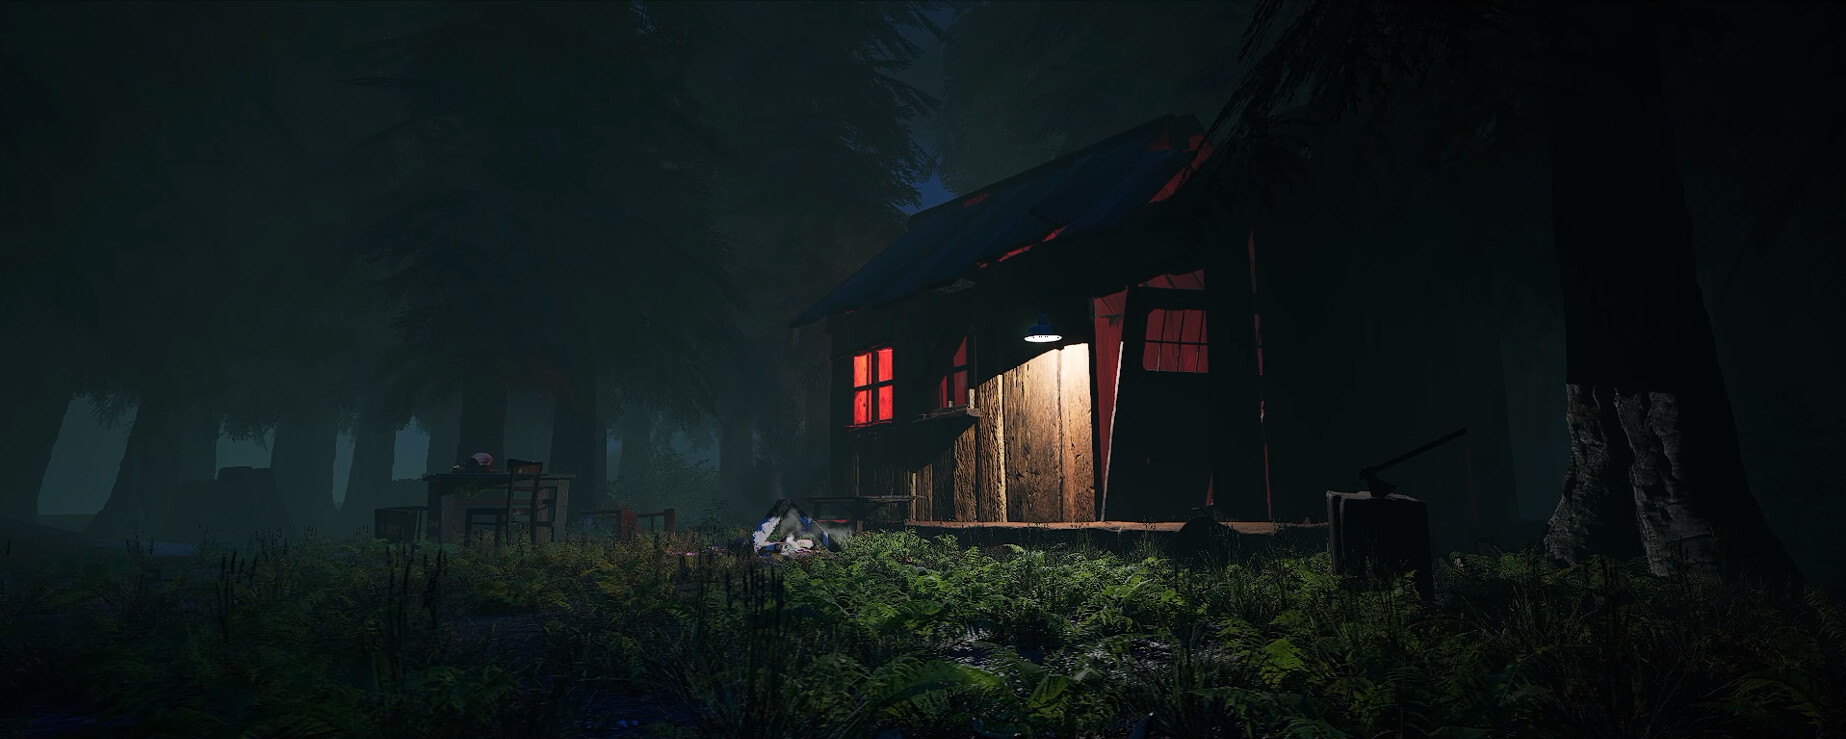 ArtStation - The Cabin in the Woods